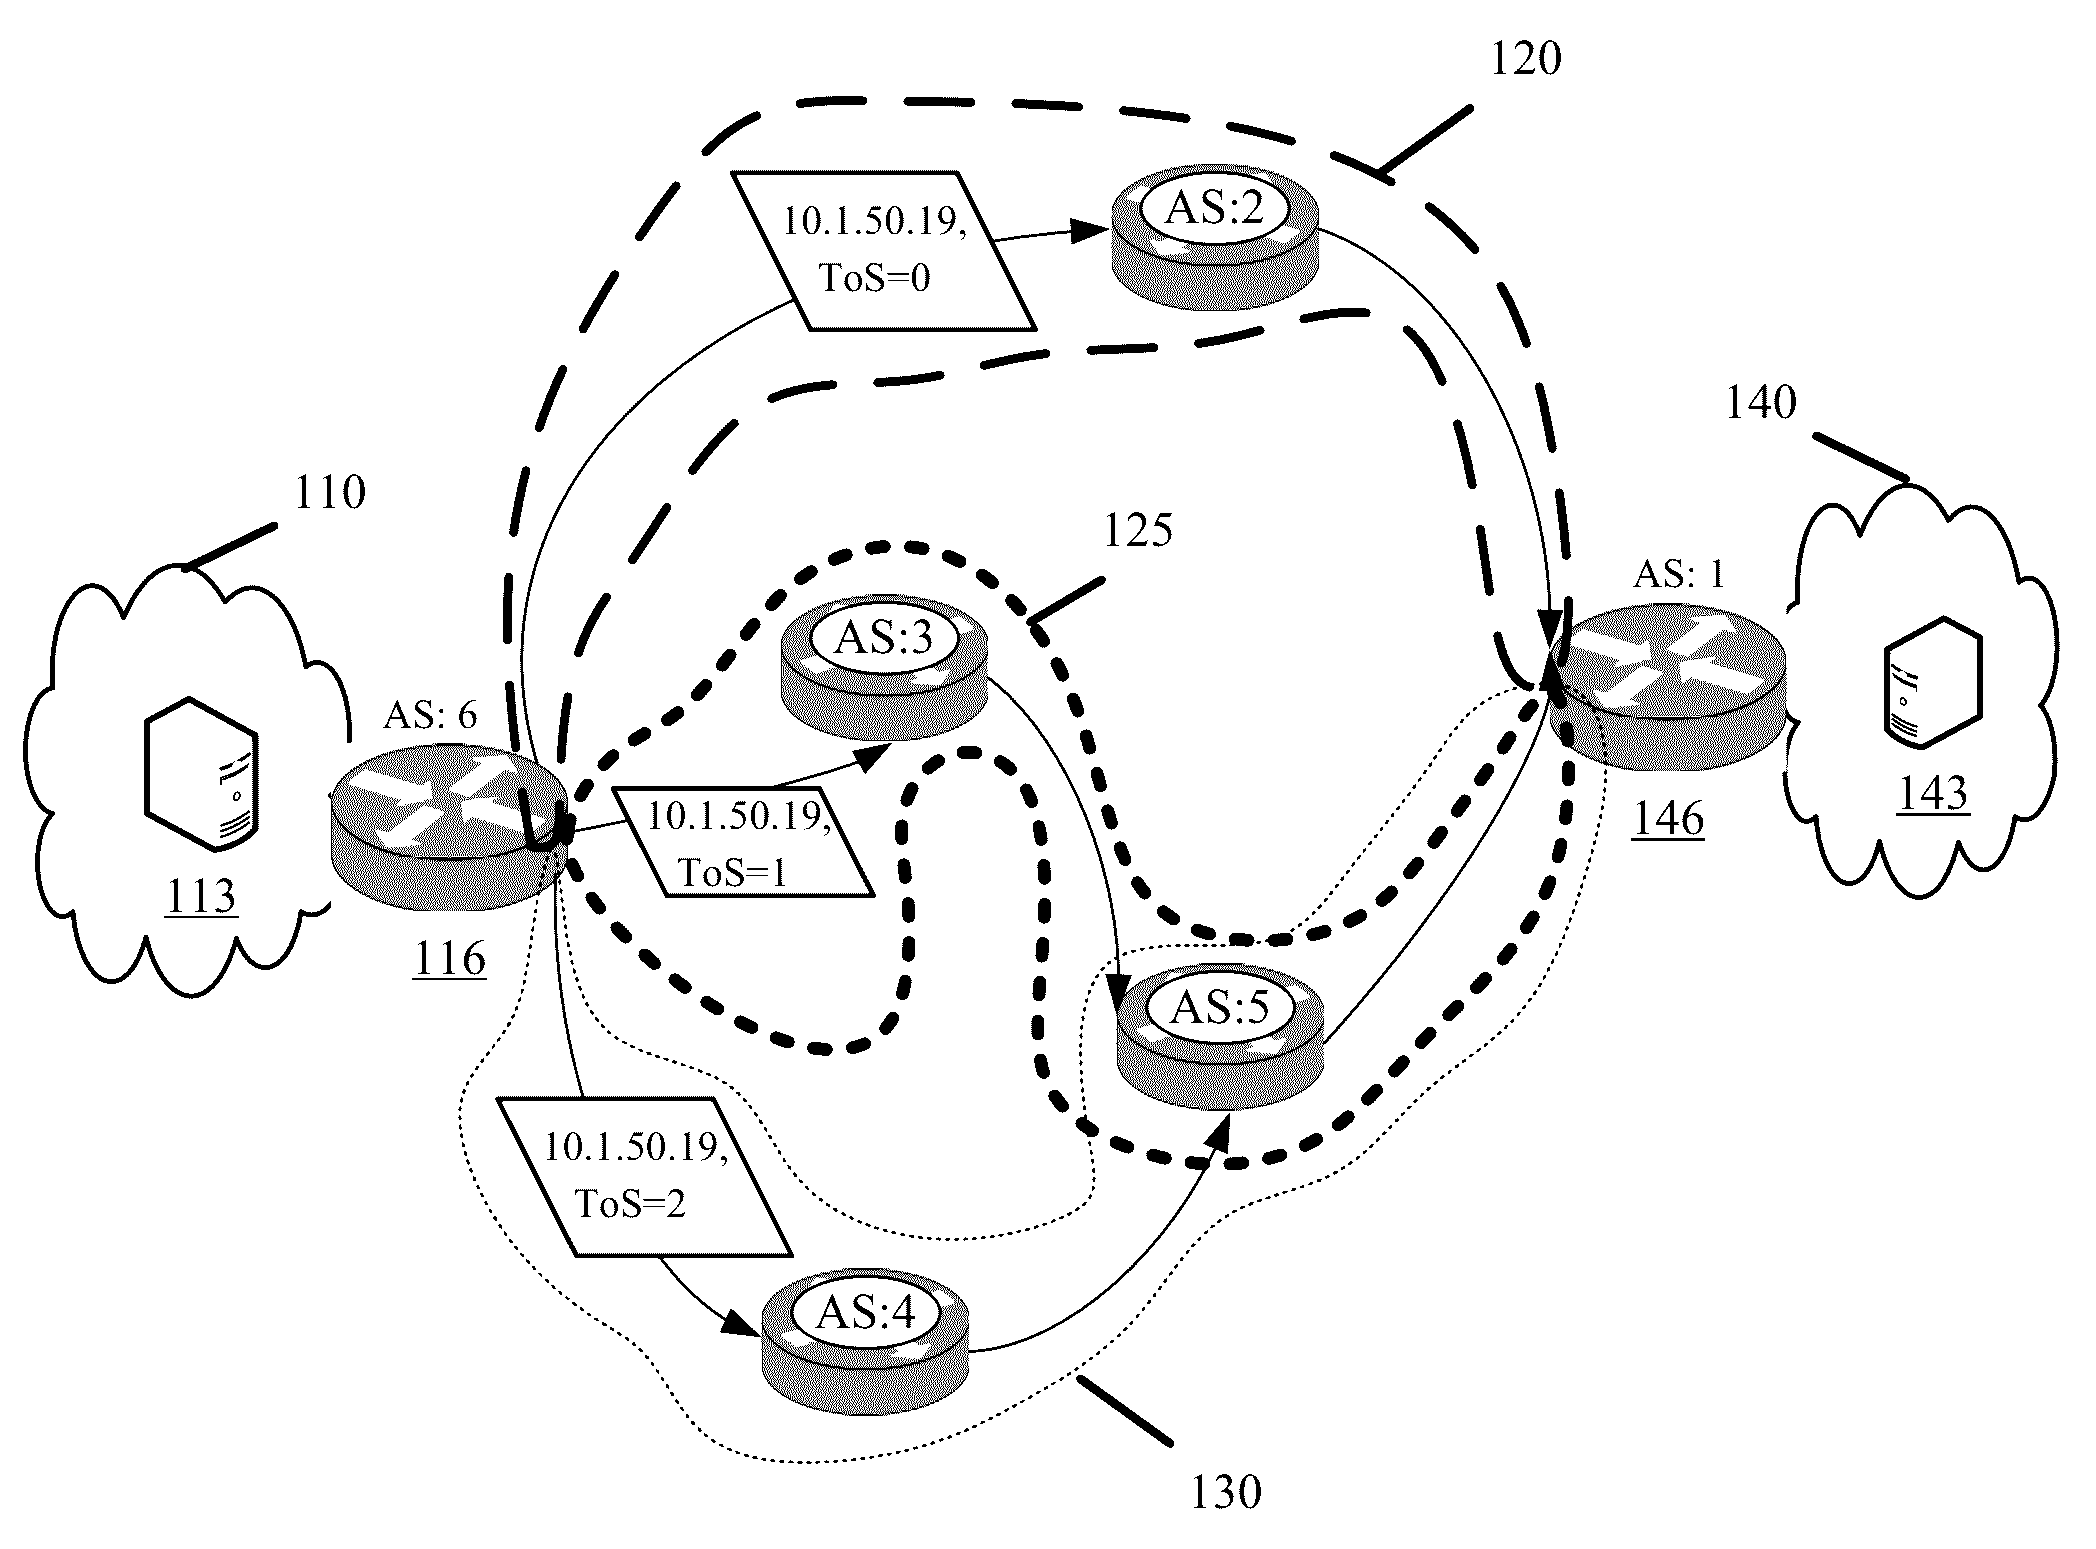 Application Controlled Path Selection Based on Type-of-Service